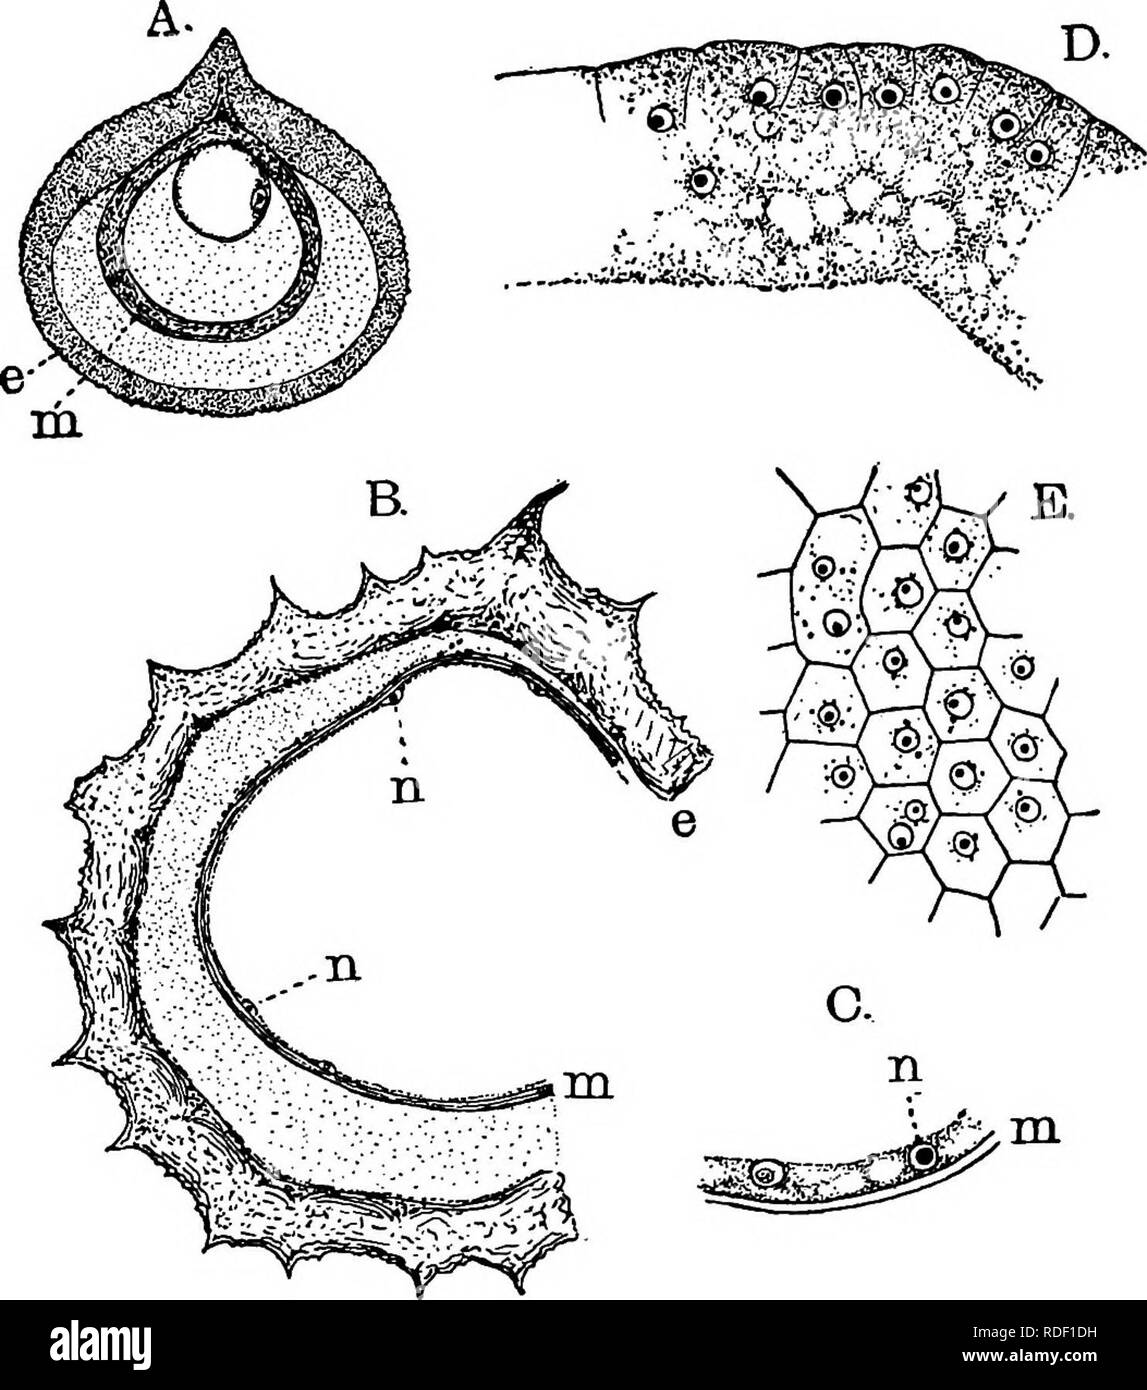 . The structure and development of mosses and ferns (Archegoniatae). Plant morphology; Mosses; Ferns. 5H MOSSES AND FERNS CSAf. at no time in 5*. Kraussiana are they confined to this apical region, as Miss Lyon states is the case in 6&quot;. apus. With the increase in the amount of protoplasm, the very large central vacuole becomes reduced in size, and finally, but this does not occur until after the germination of the spore, is. Fig. 2g6.—A, Young macrospore of Selaginella helvetica. The vesicular protoplast, with the primary nucleus, is much smaller than the spore membranes, X 400; B-E, S, K Stock Photo